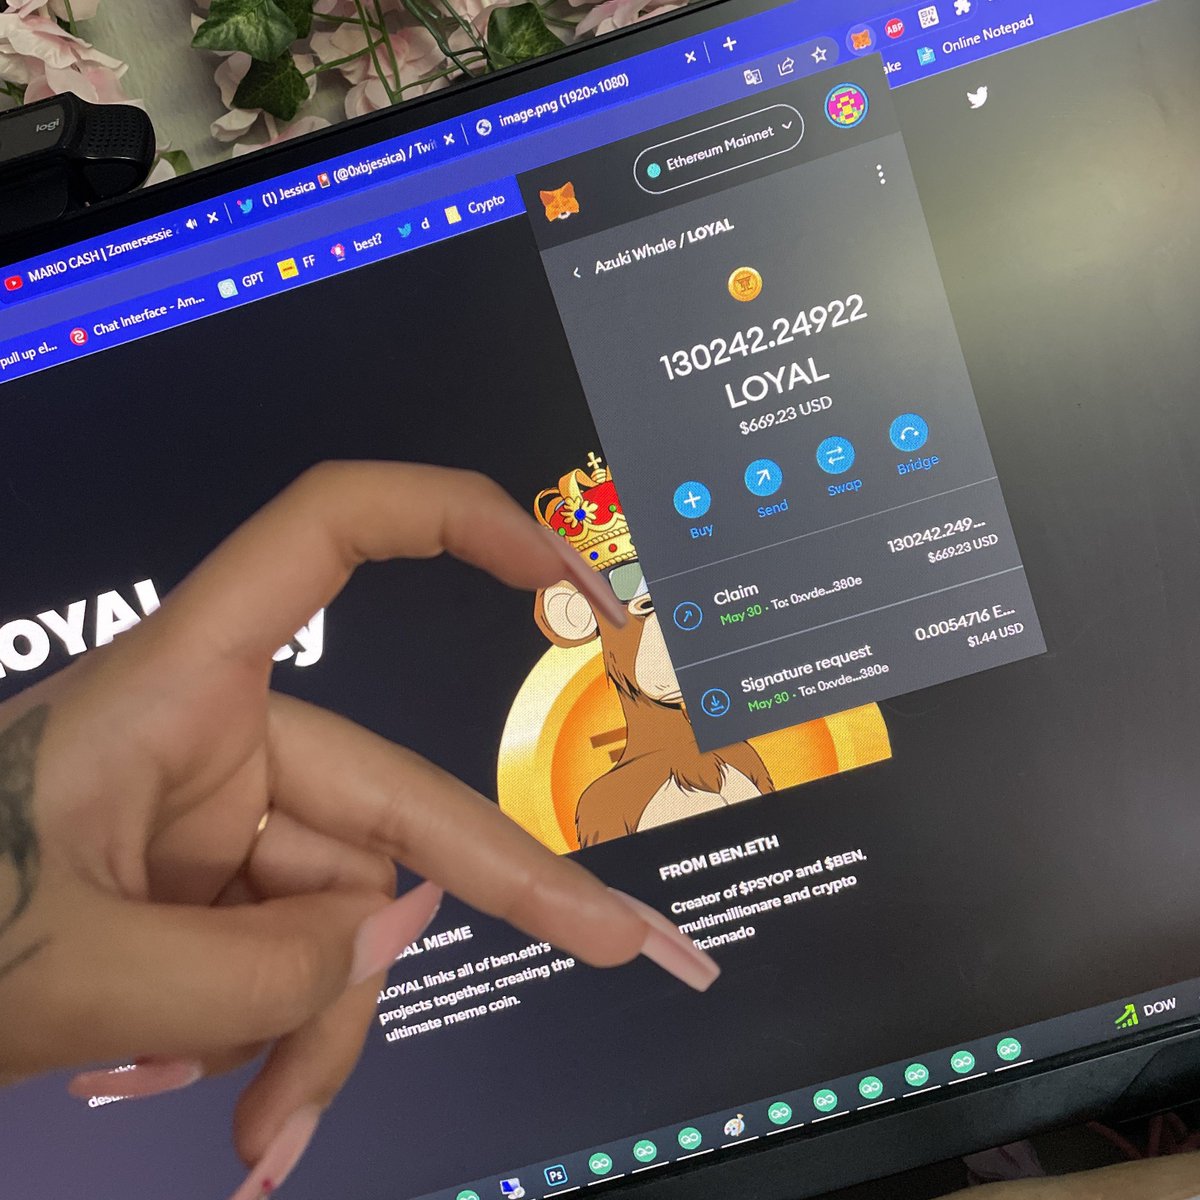 omg i just claimed $670 from the $LOYAL airdrop? claim now 👇

🔗 loyal.holdings 🎁

$ADA #crypto #100X #MATIC BTC $SUI Ether #USDC $QNT #NFTs $XEN $APE #ETH #airdrops $LINK $DOGE $XRP $PEPE $MONG $BOB $WAGMI #MATIC $CAW $SHIB $FLOKI $DAVE $PSYOP $BEN #USDT $BTC Pauly